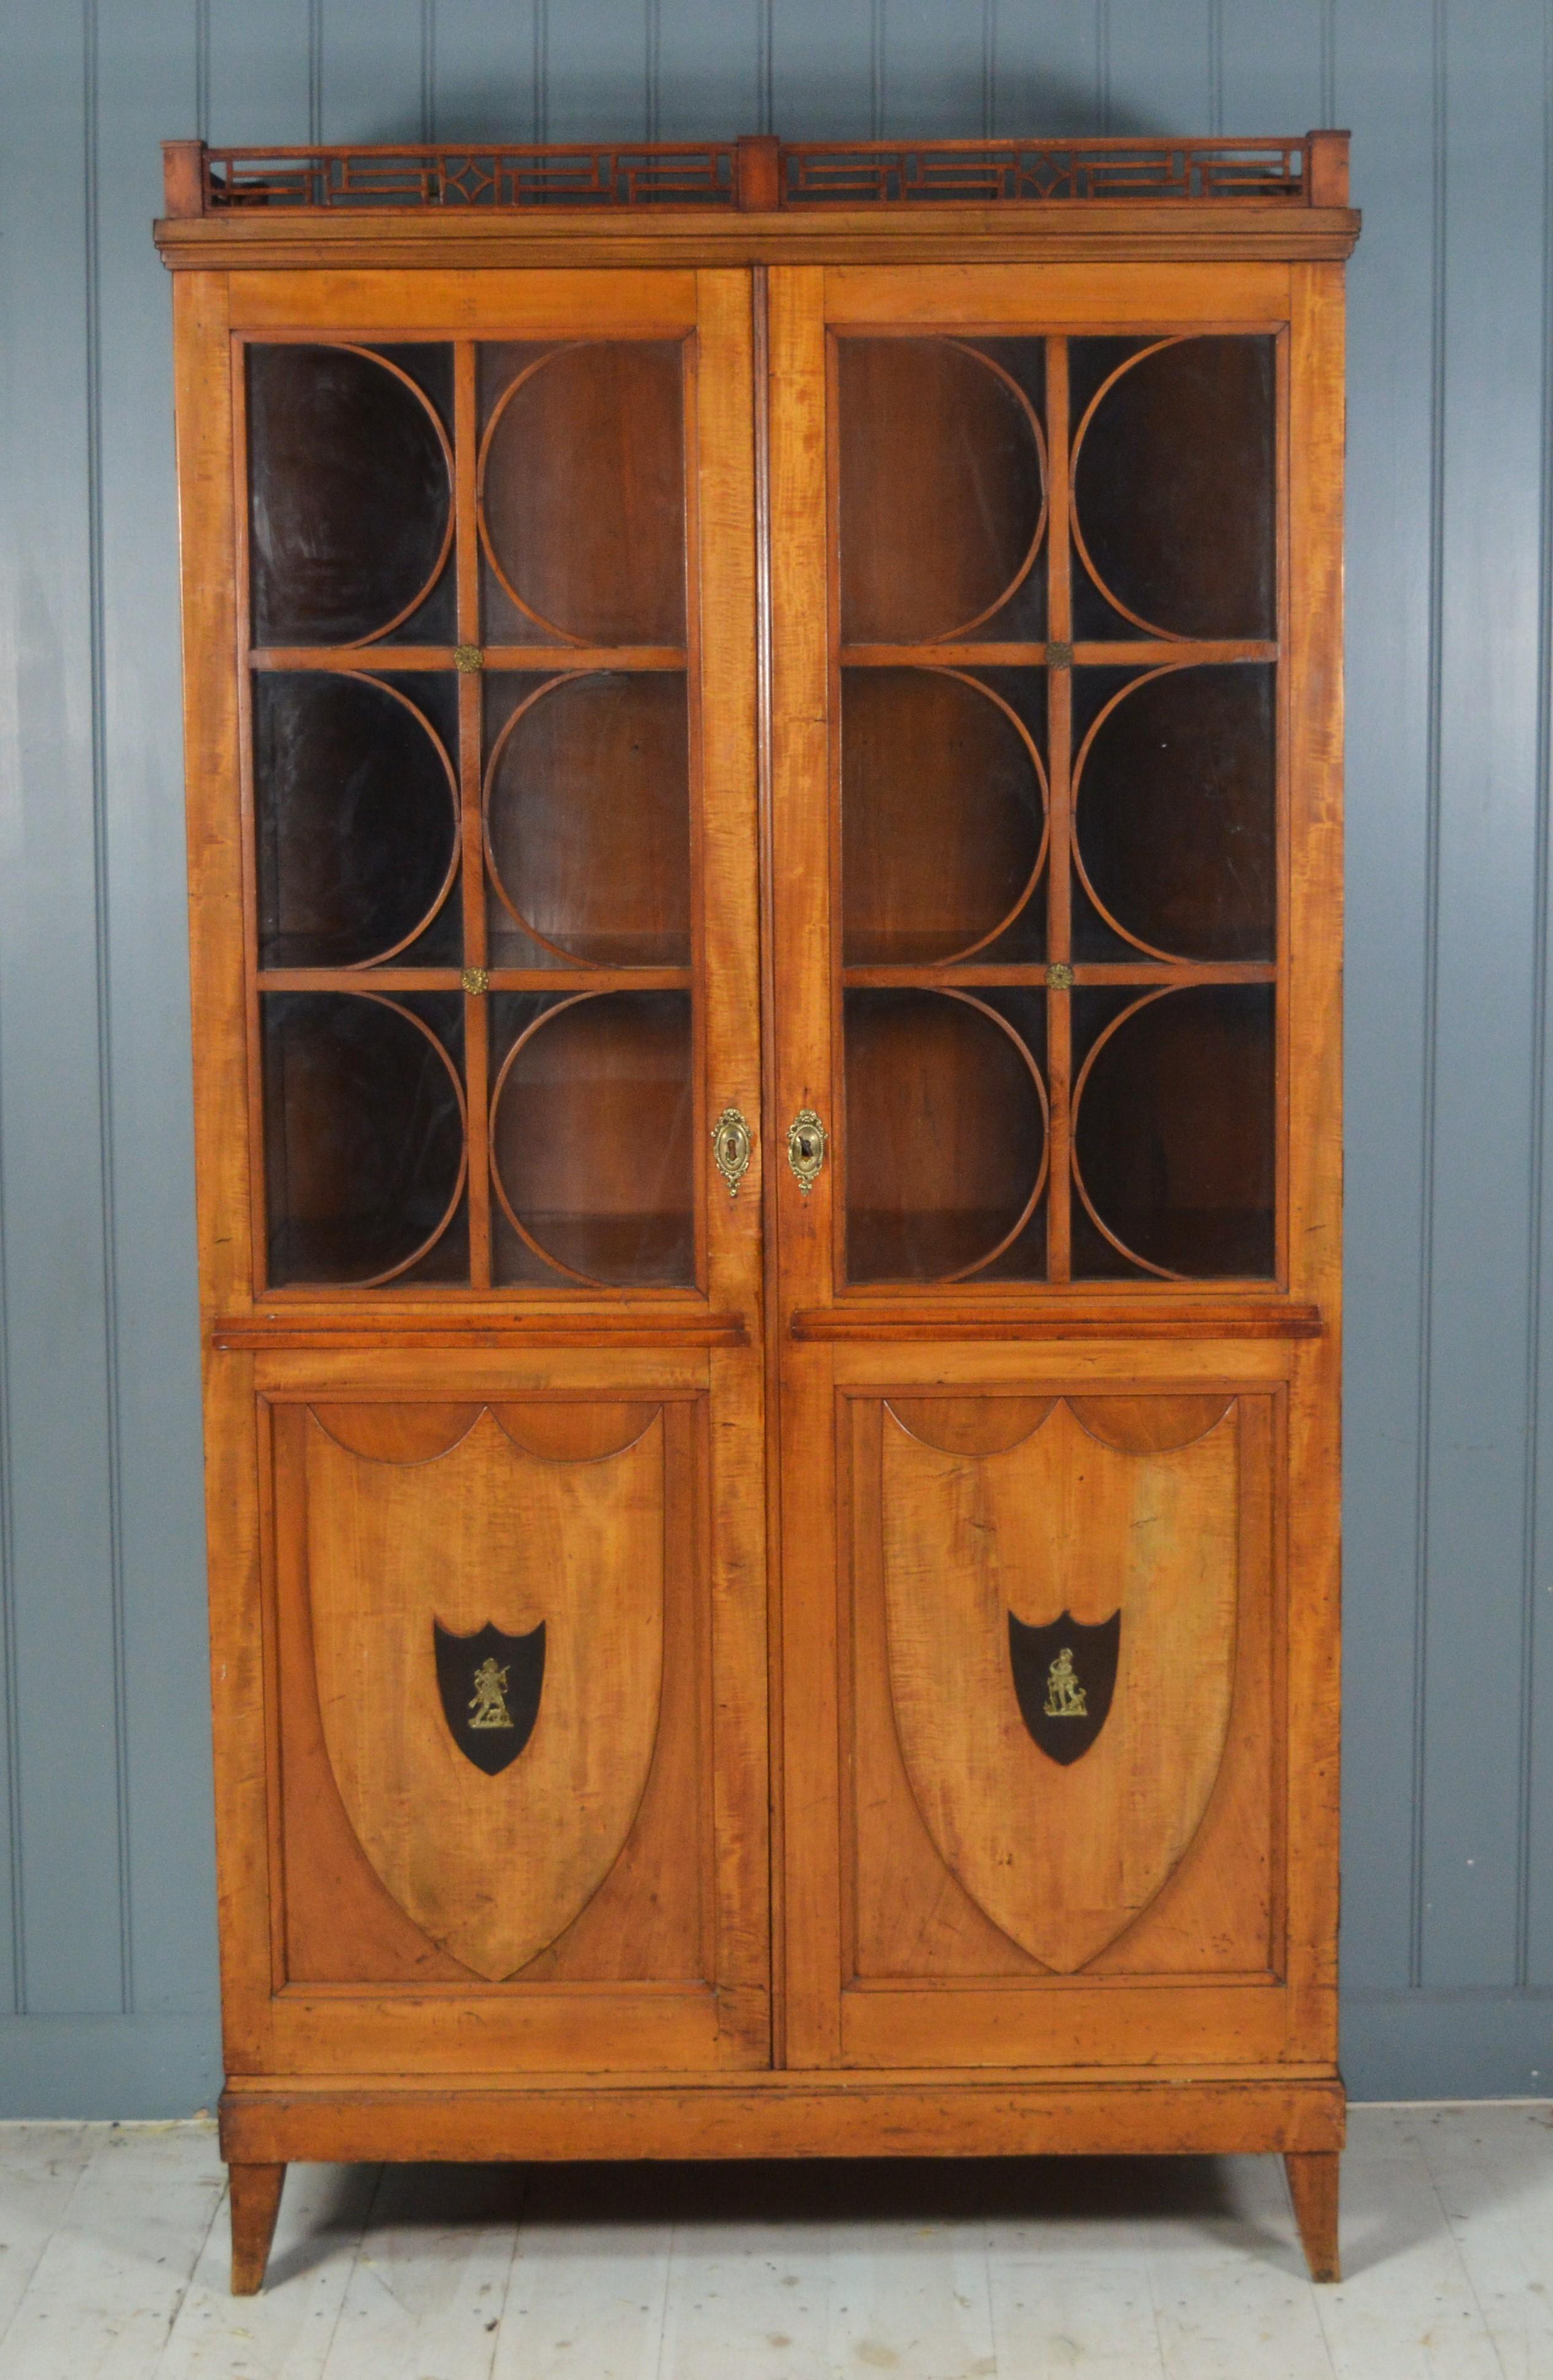  A superb Satinwood display cabinet in the Biedermeier style with shield panels on the lower case. It has 2 drawers on the inside made of pitch pine with ring drop handles, the carcass is made of good quality pine probably Douglas fir.  The whole